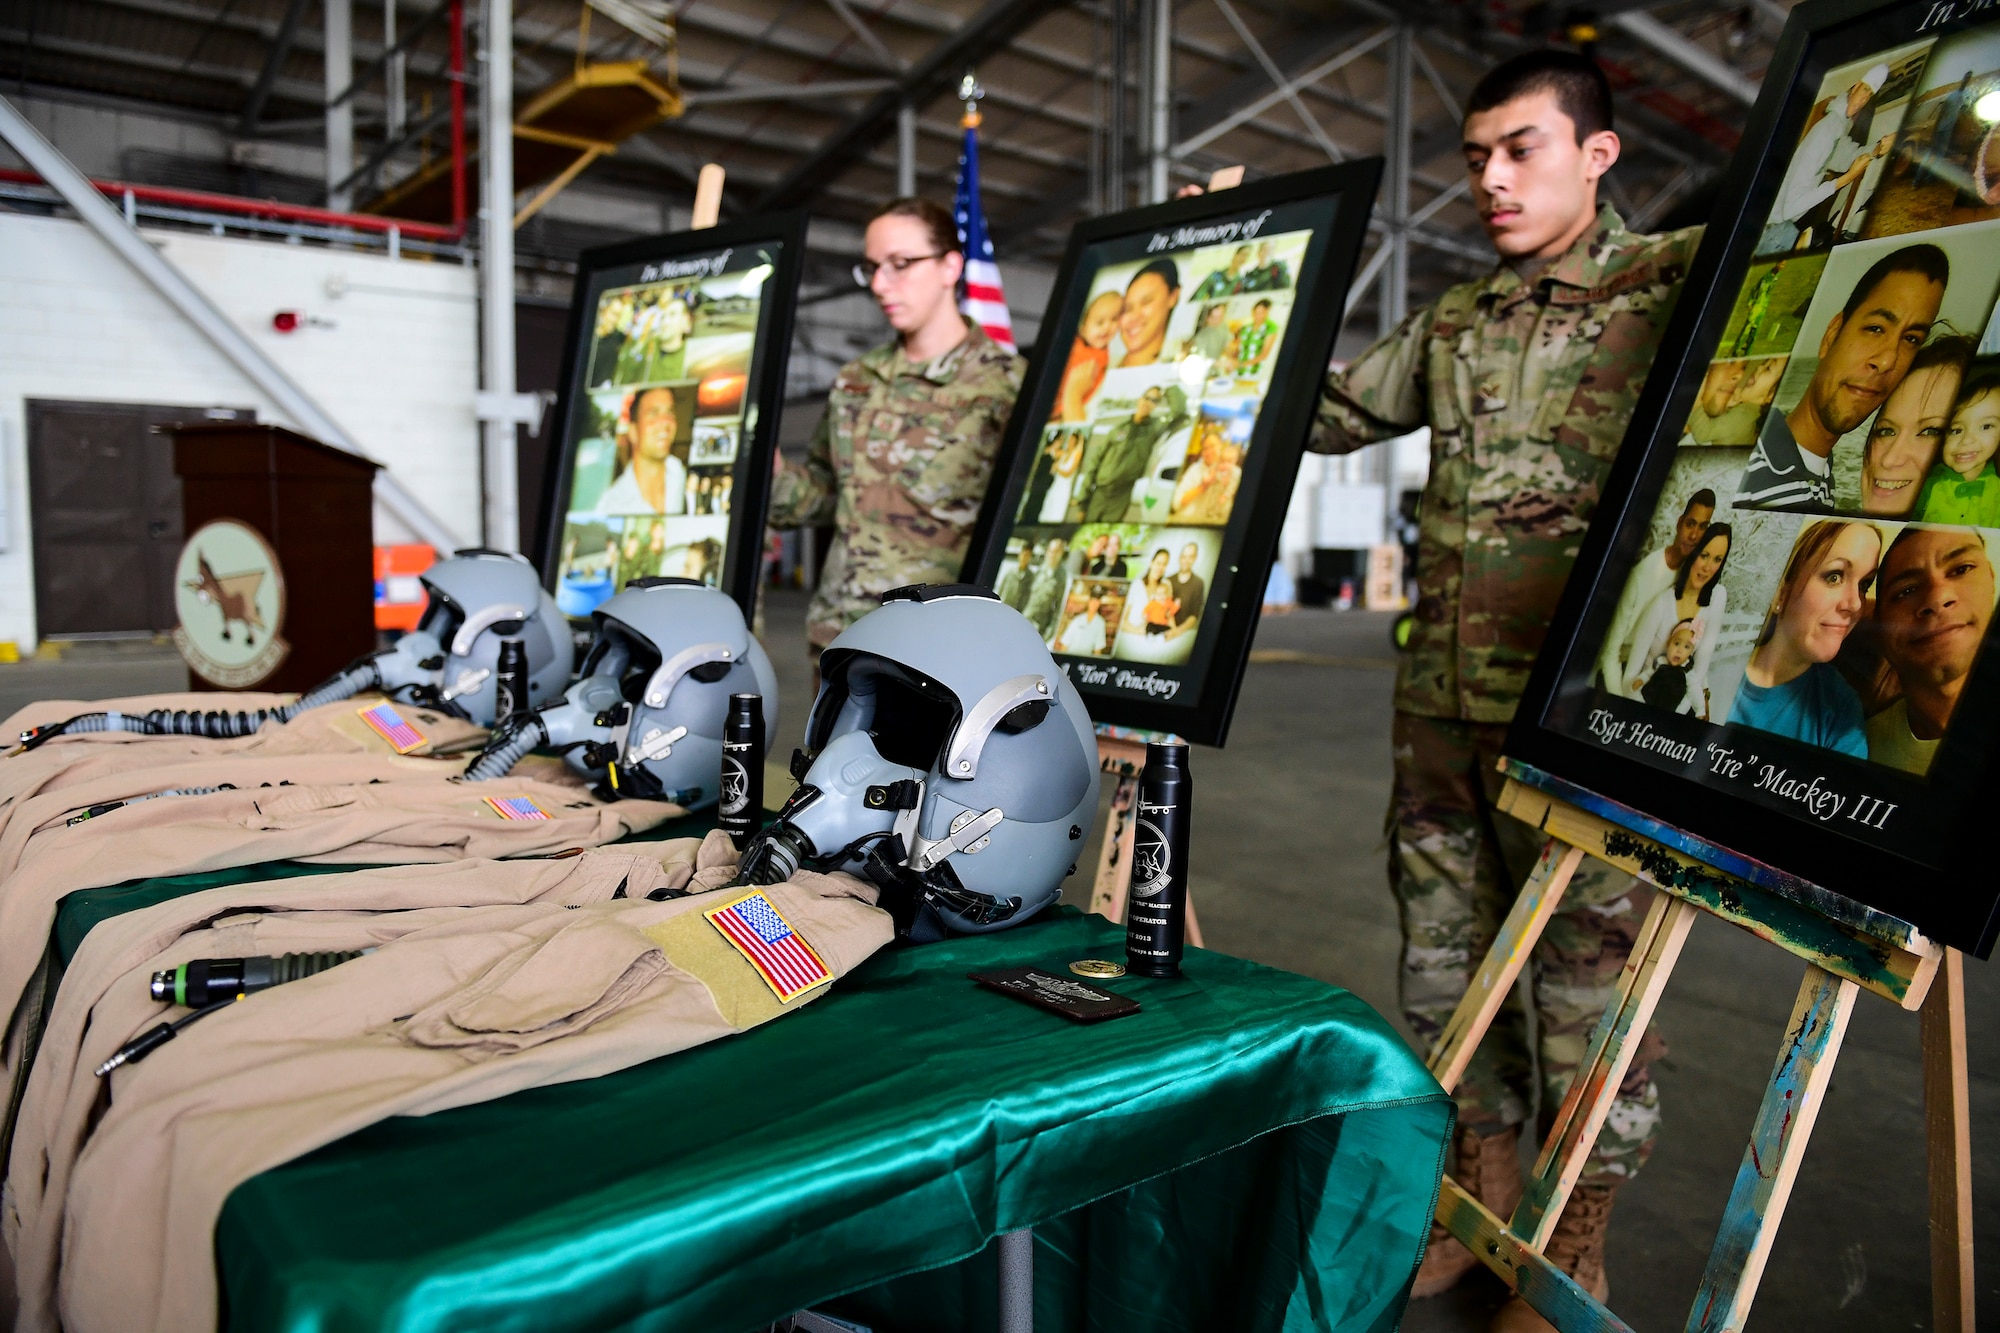 Airmen form the 22d Expeditionary Air Refueling Squadron view a display during the Shell 77 memorial ceremony, May 3, 2019, at Incirlik Air Base, Turkey. The three Airmen remembered were Capt. Mark T. Voss, Capt. Victoria A. Pinckney and Tech Sgt. Herman “Tre” Mackey III., who were deployed to 22d EARS from the 92d Air Refueling Wing at Fairchild Air Force Base, Wash., in support of Operation Enduring Freedom. (U.S. Air Force photo by Staff Sgt. Ceaira Tinsley)